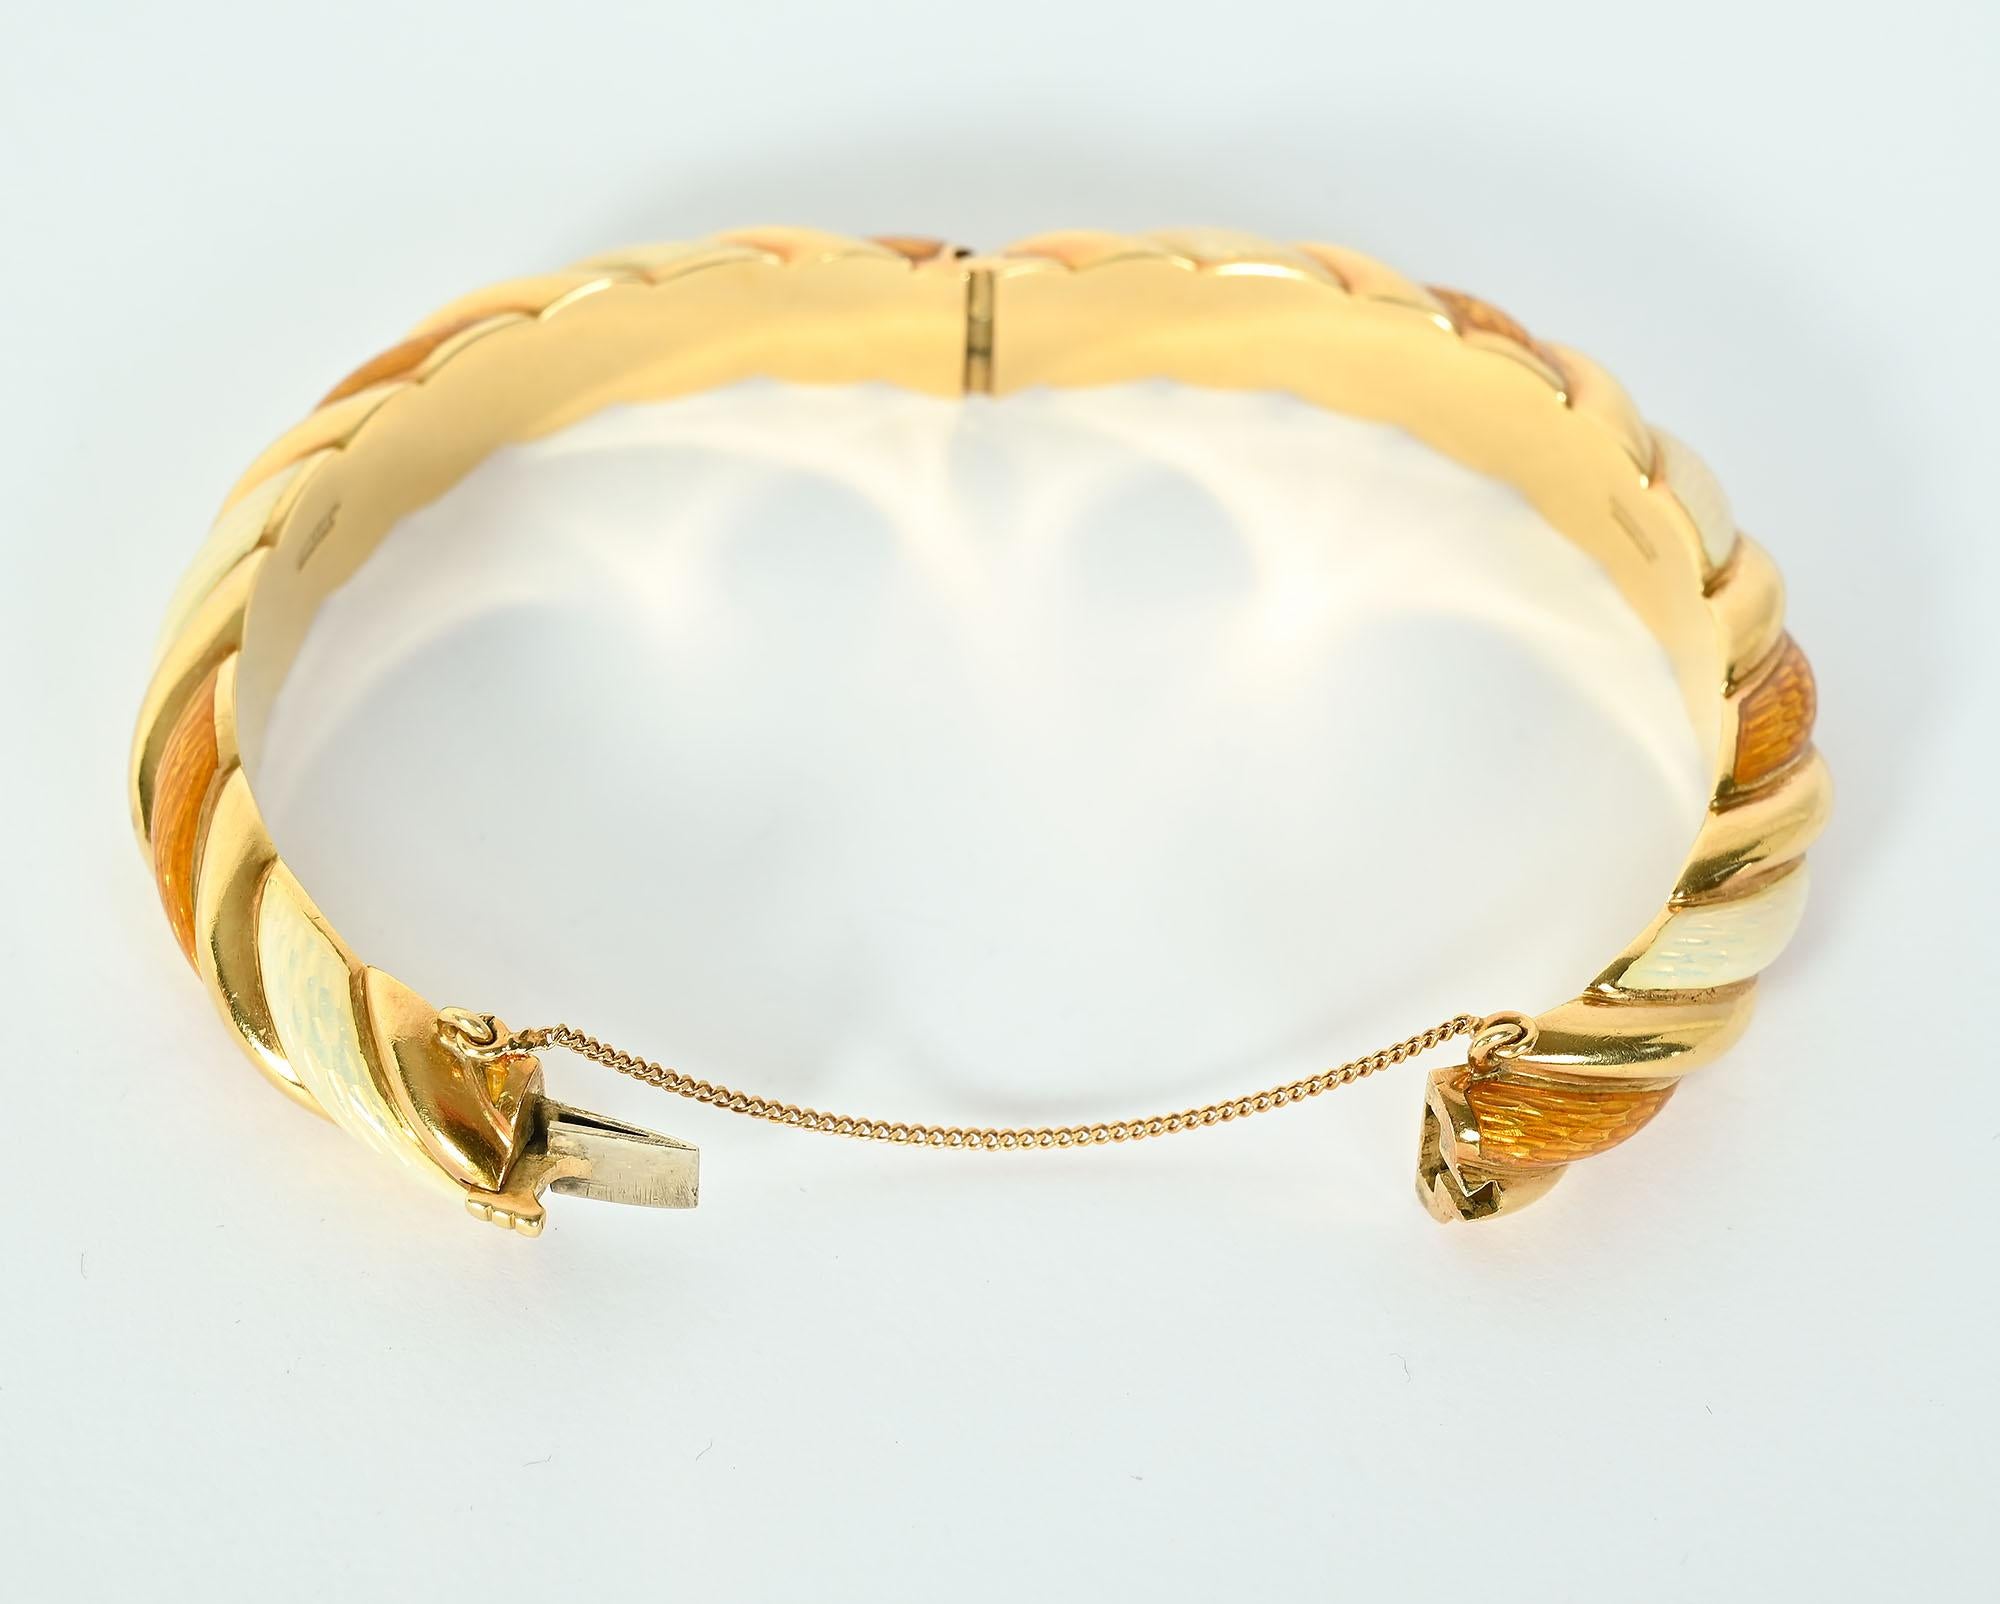 Tiffany & Co. Enamel Bangle Bracelet In Excellent Condition For Sale In Darnestown, MD